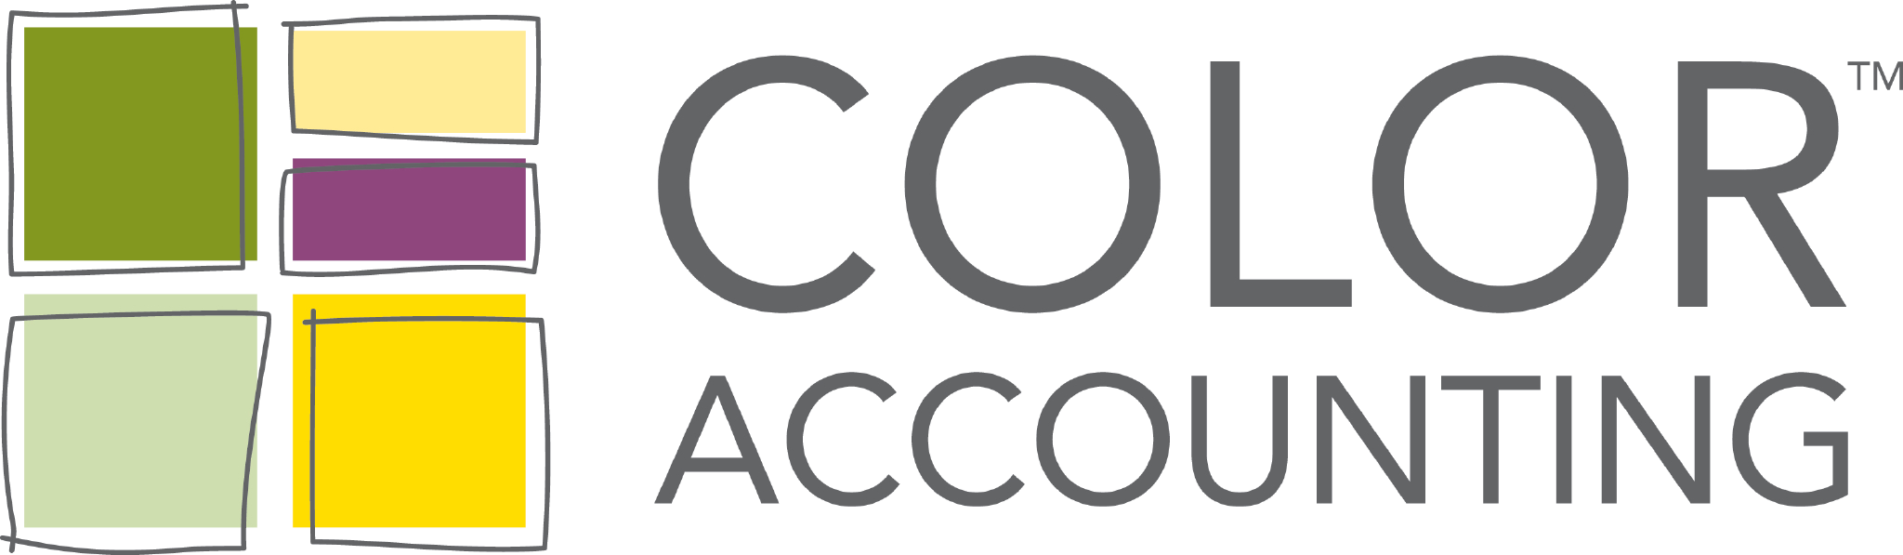 Color Accounting | Universal Accounting School